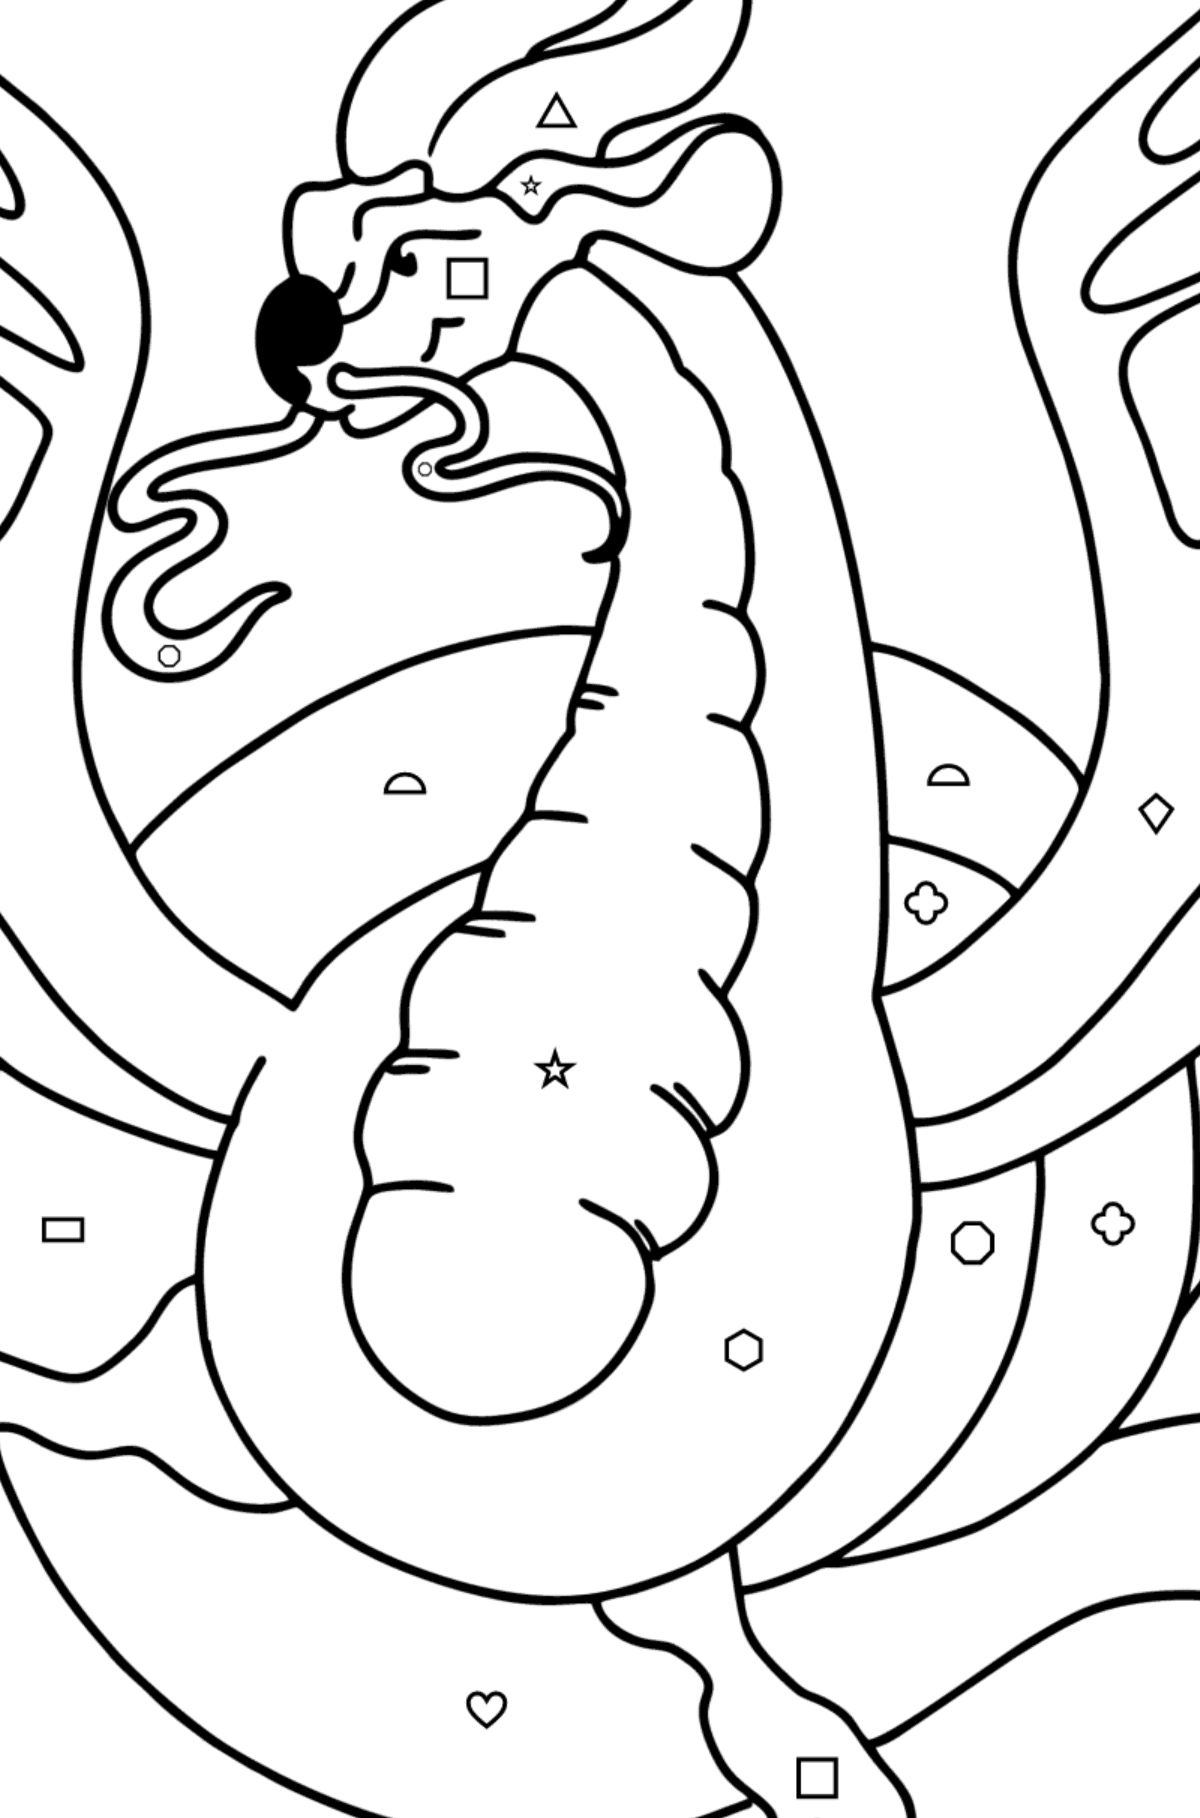 Dangerous Dragon coloring page - Coloring by Geometric Shapes for Kids